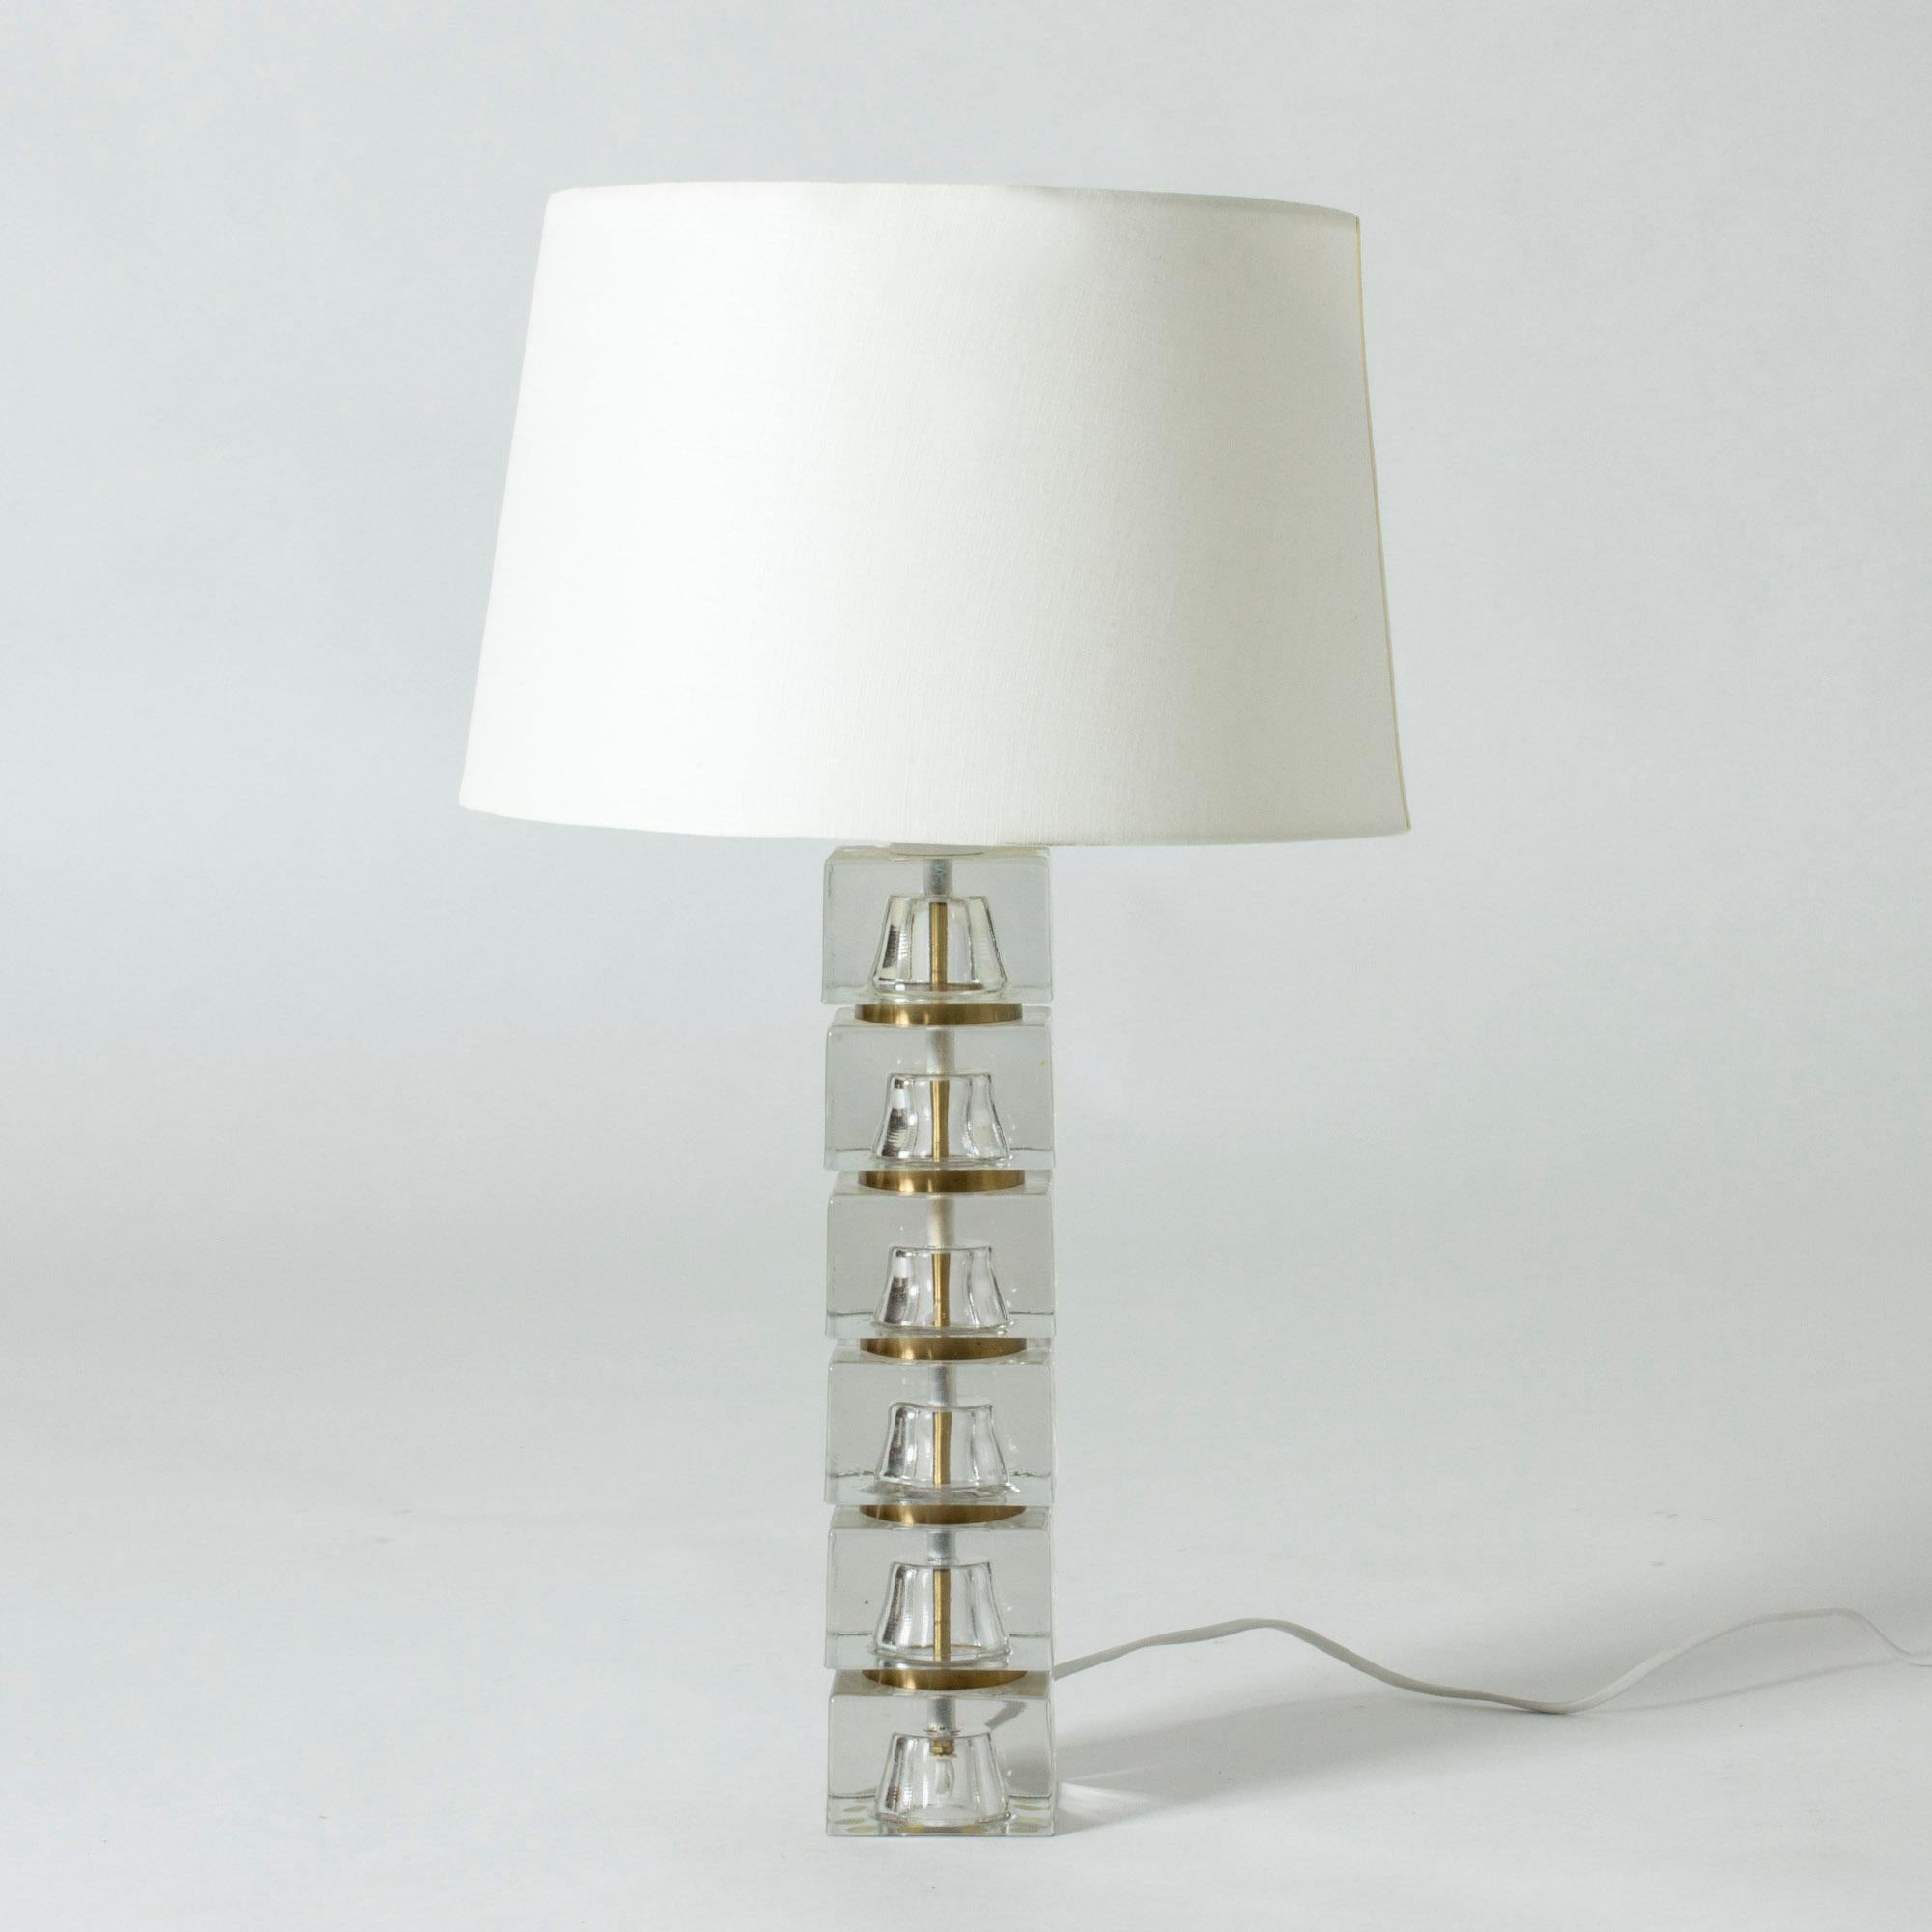 Cool Swedish 1960s crystal table lamp where the base is made from translucent blocks. A slender brass pipe concealing the wiring runs through the middle of the base, creating a cool visual effect. The sections between the blocks are painted gold.